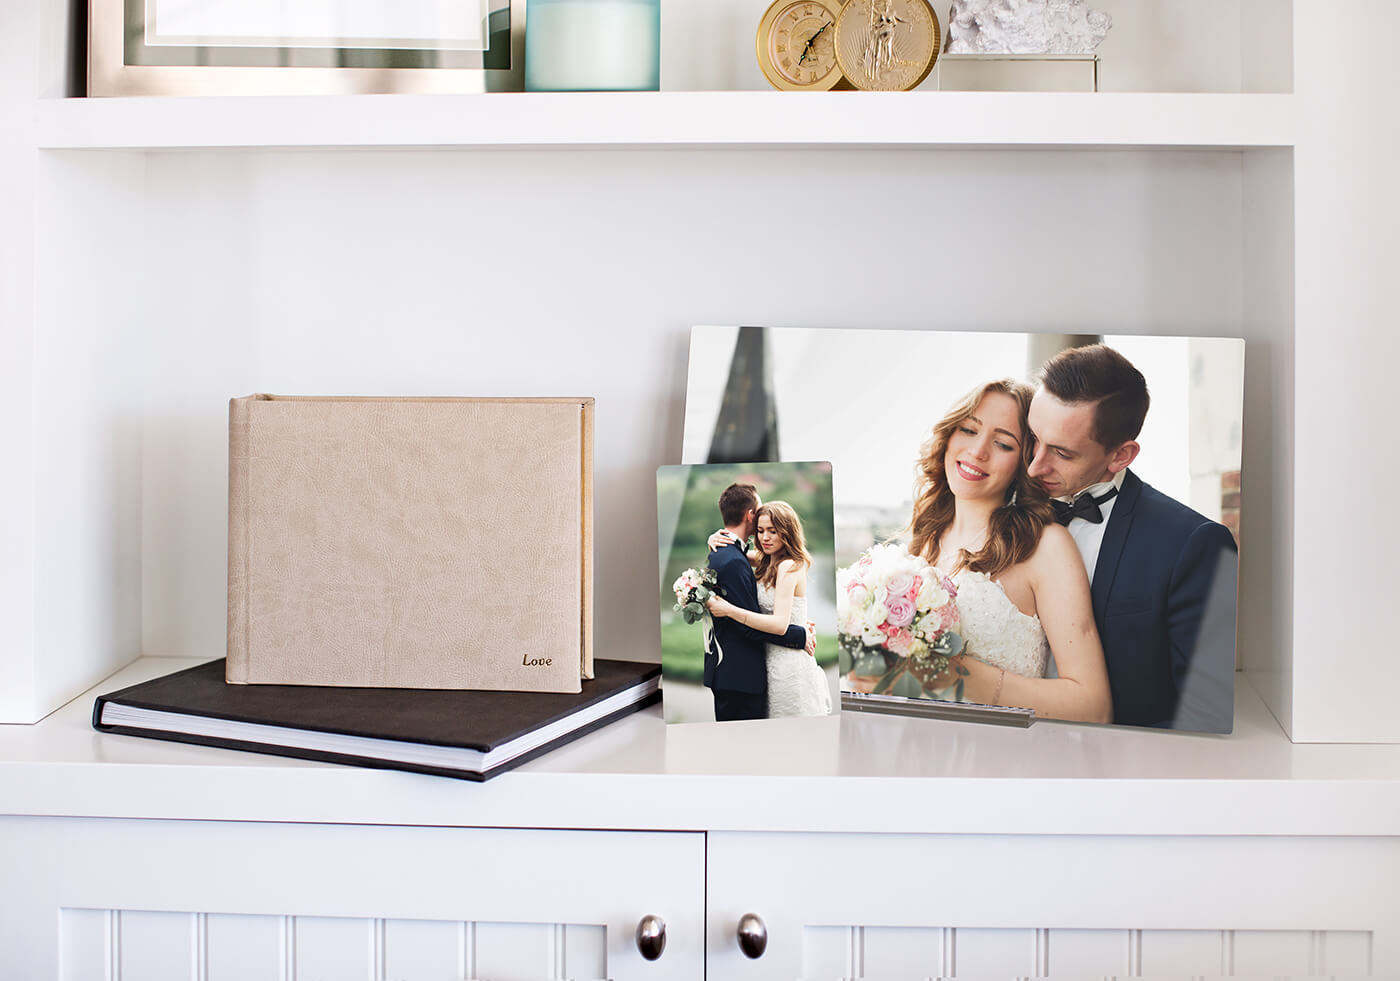 wedding albums and photos by printique on shelf